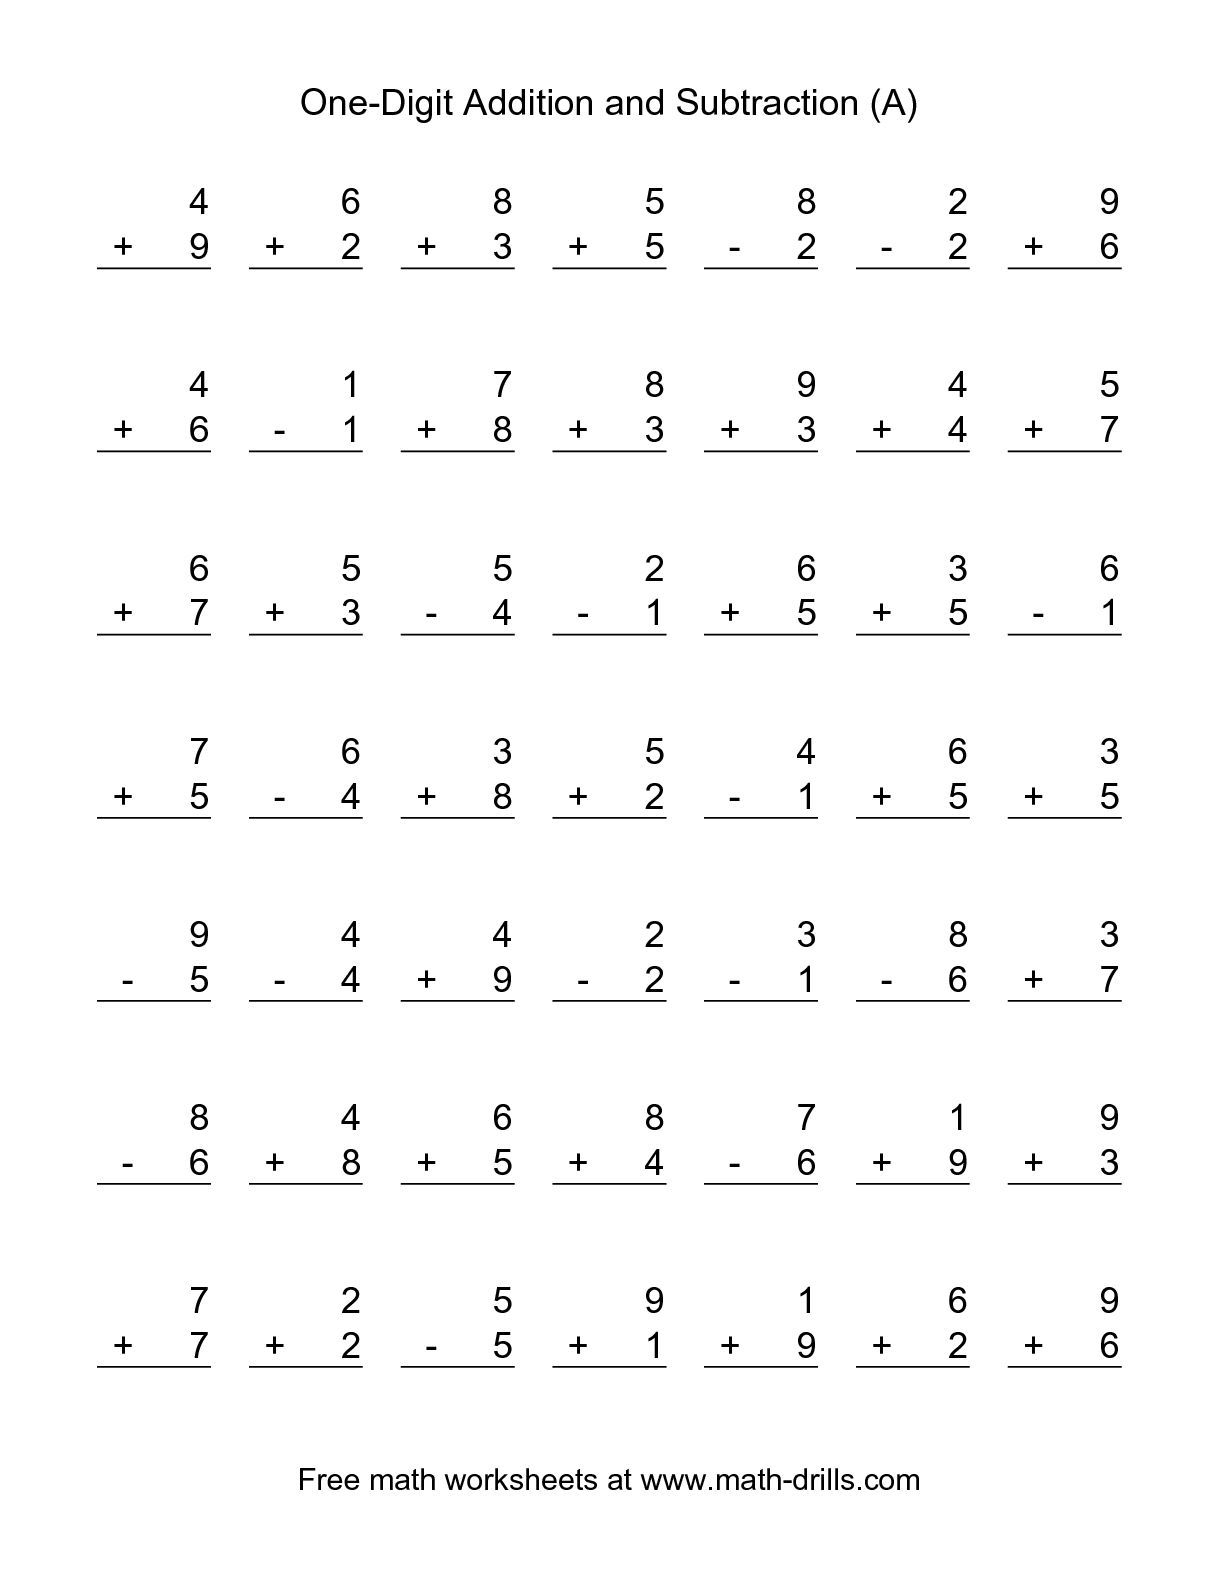 The Single-Digit (A) Math Worksheet From The Combined Addition And - Free Printable Mixed Addition And Subtraction Worksheets